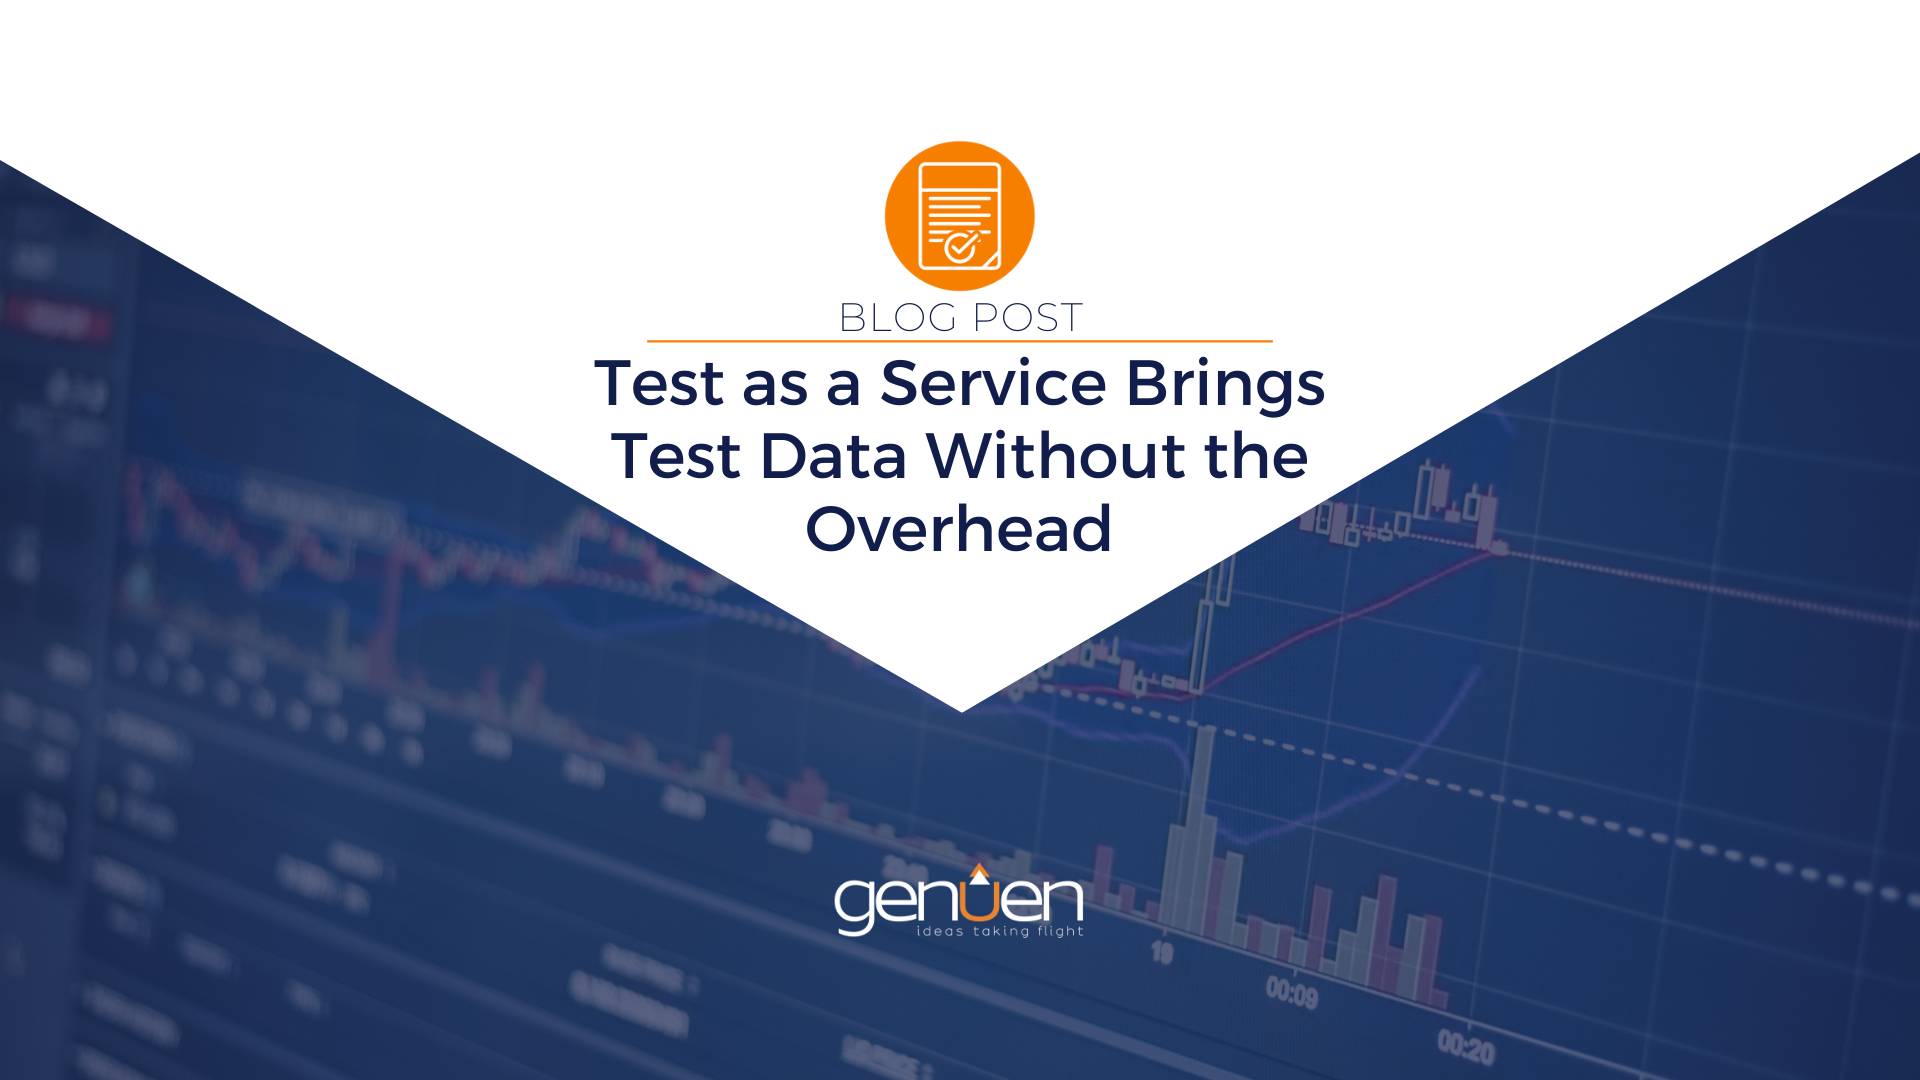 Test as a Service Brings Test Data Without the Overhead